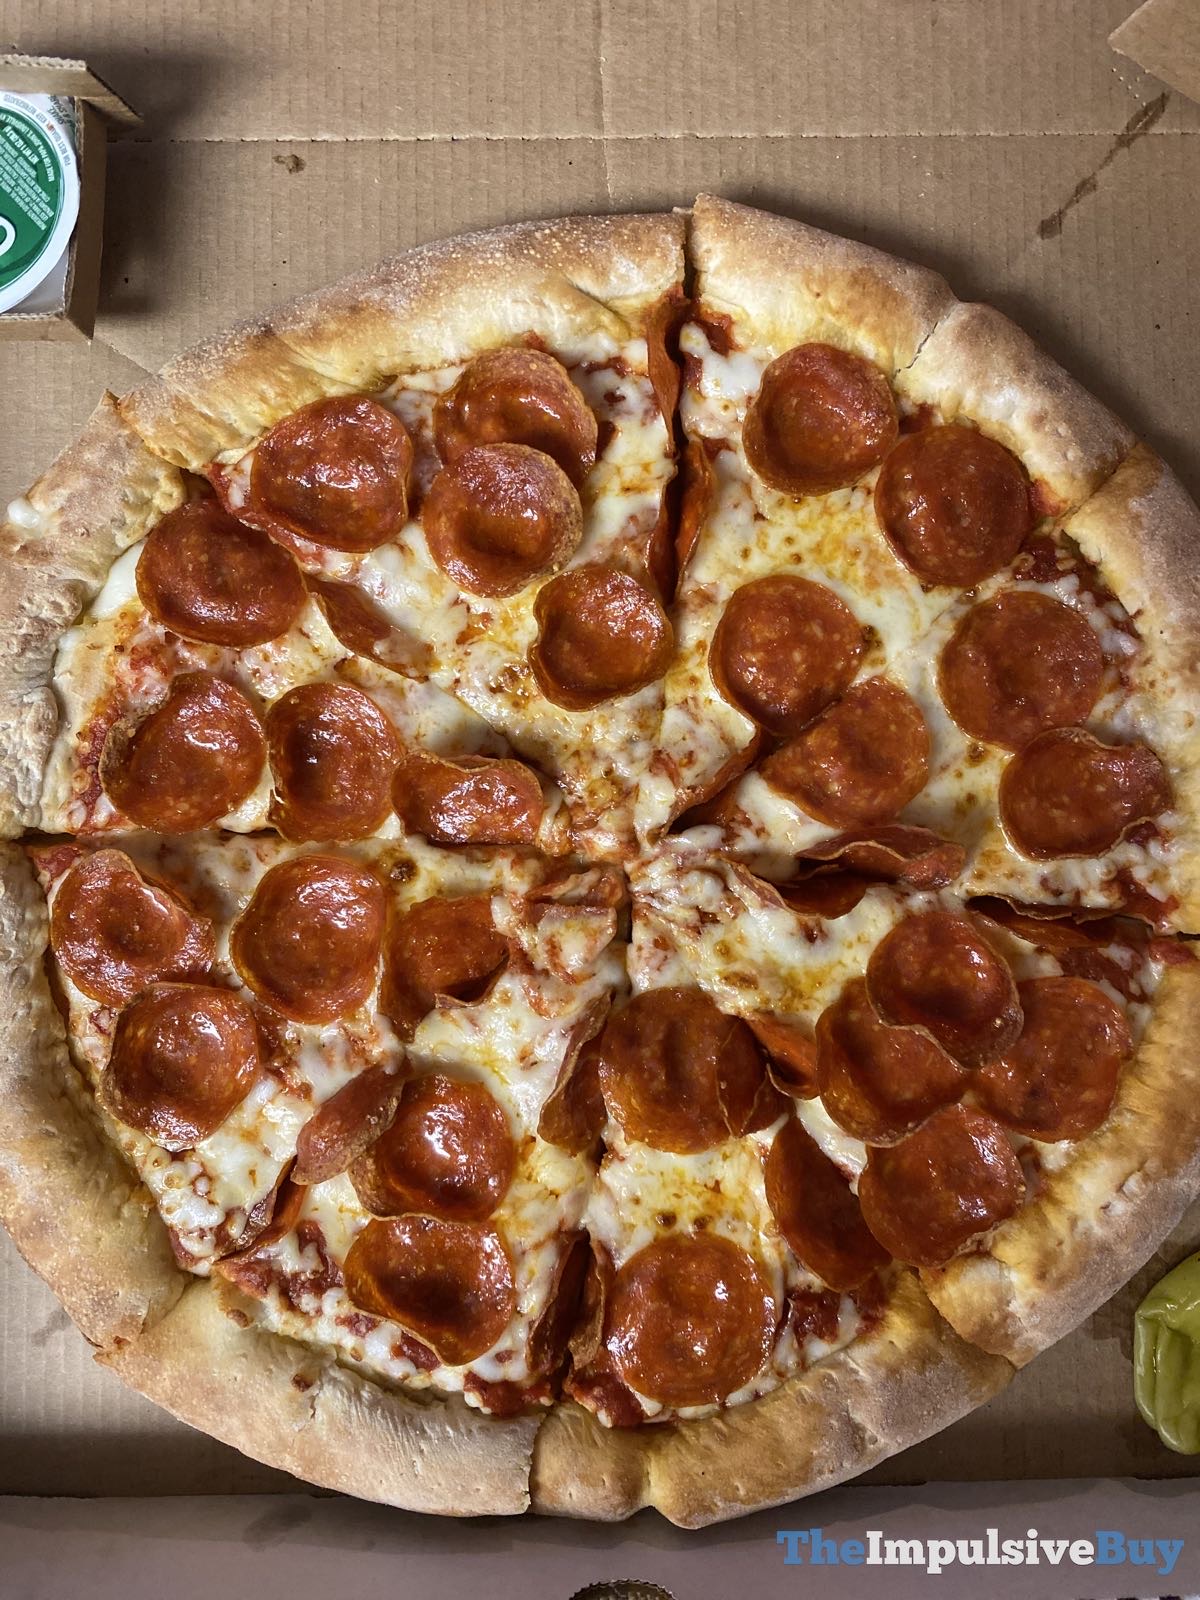 Papa John's Is Selling A Pizza Covered In Hot Dogs